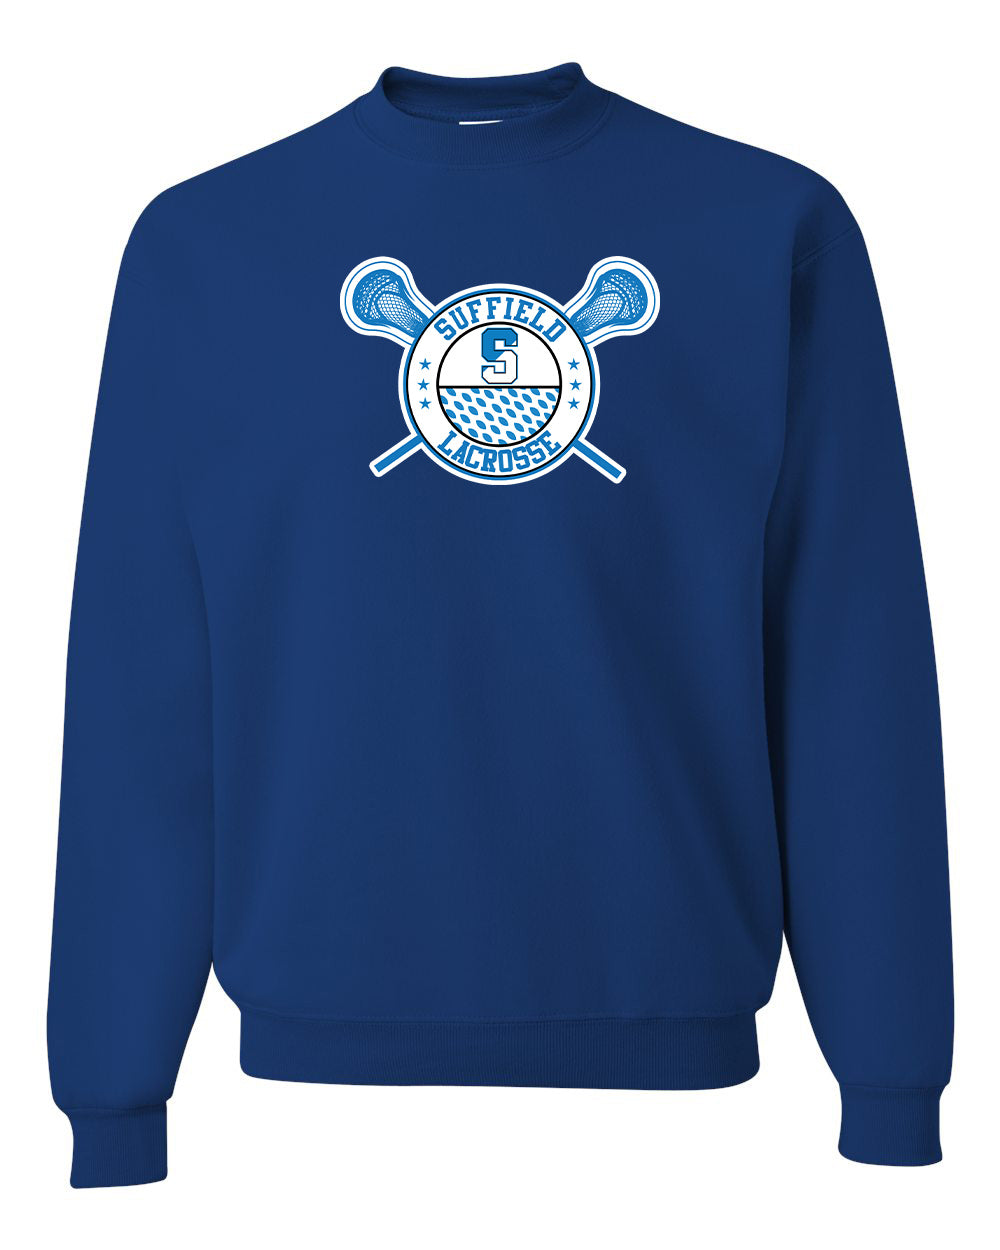 Suffield Youth Lacrosse - Adult Crewneck "Circle" - 562MR (color options available)